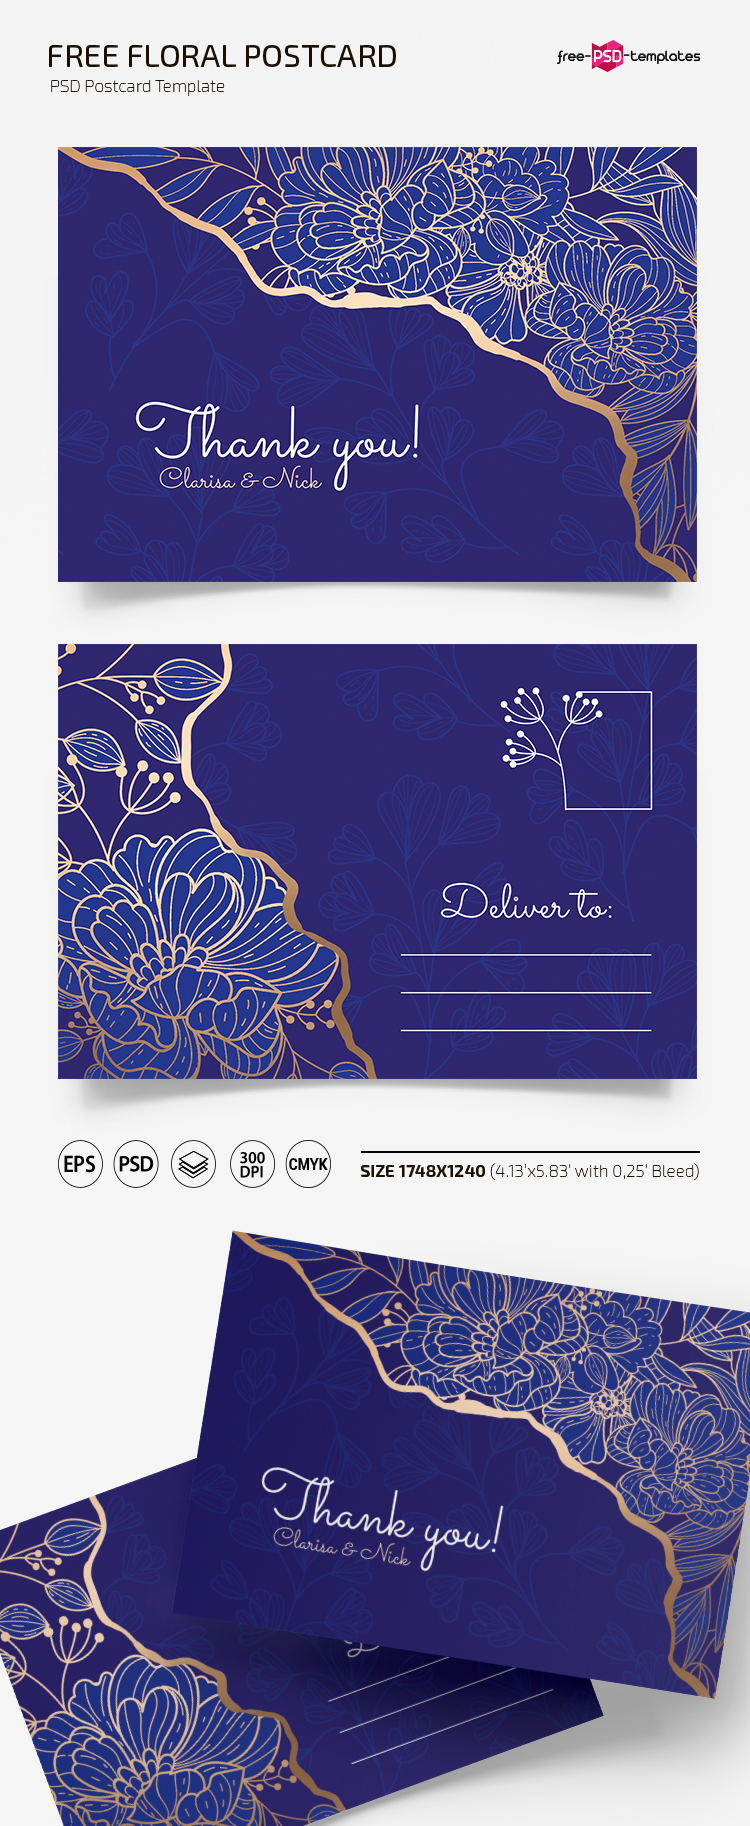 free-floral-postcard-templates-in-psd-eps-free-psd-templates